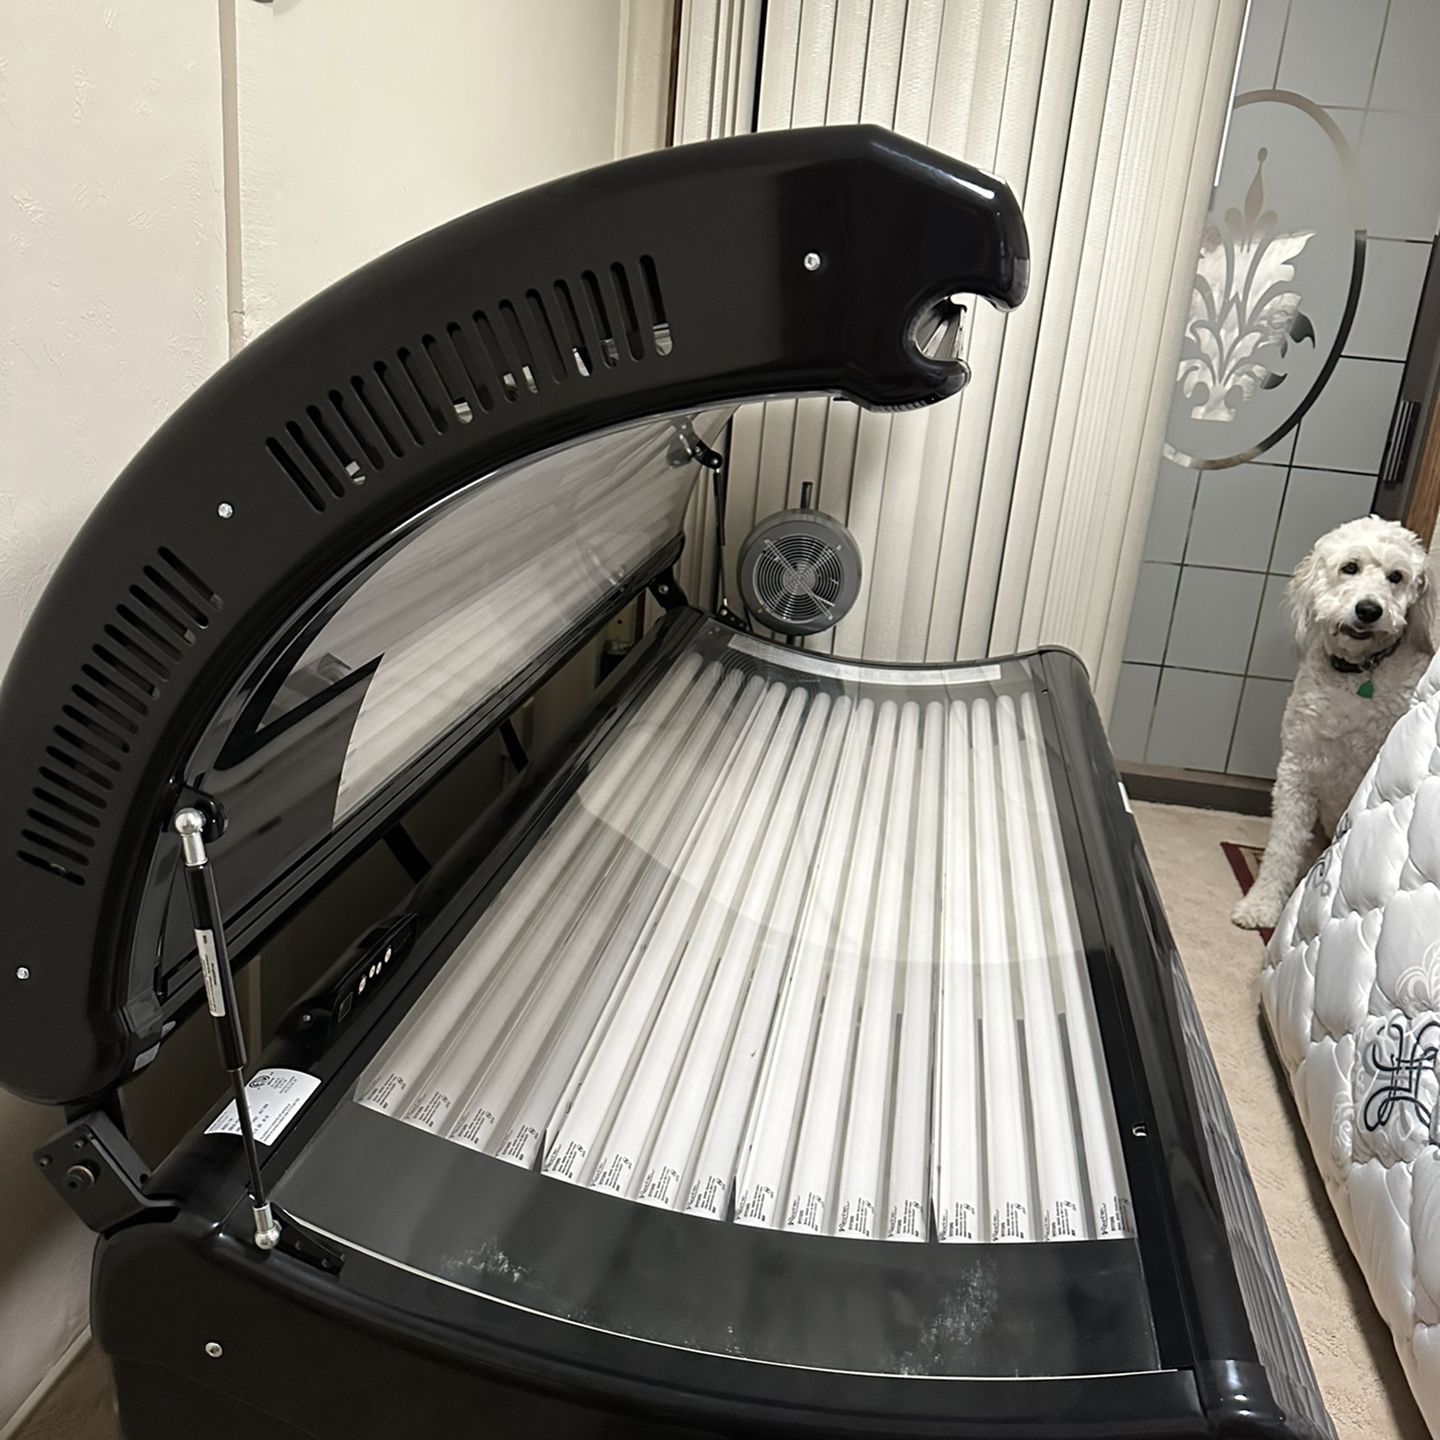 Tanning Bed Ovation 3400 Model 134 Used